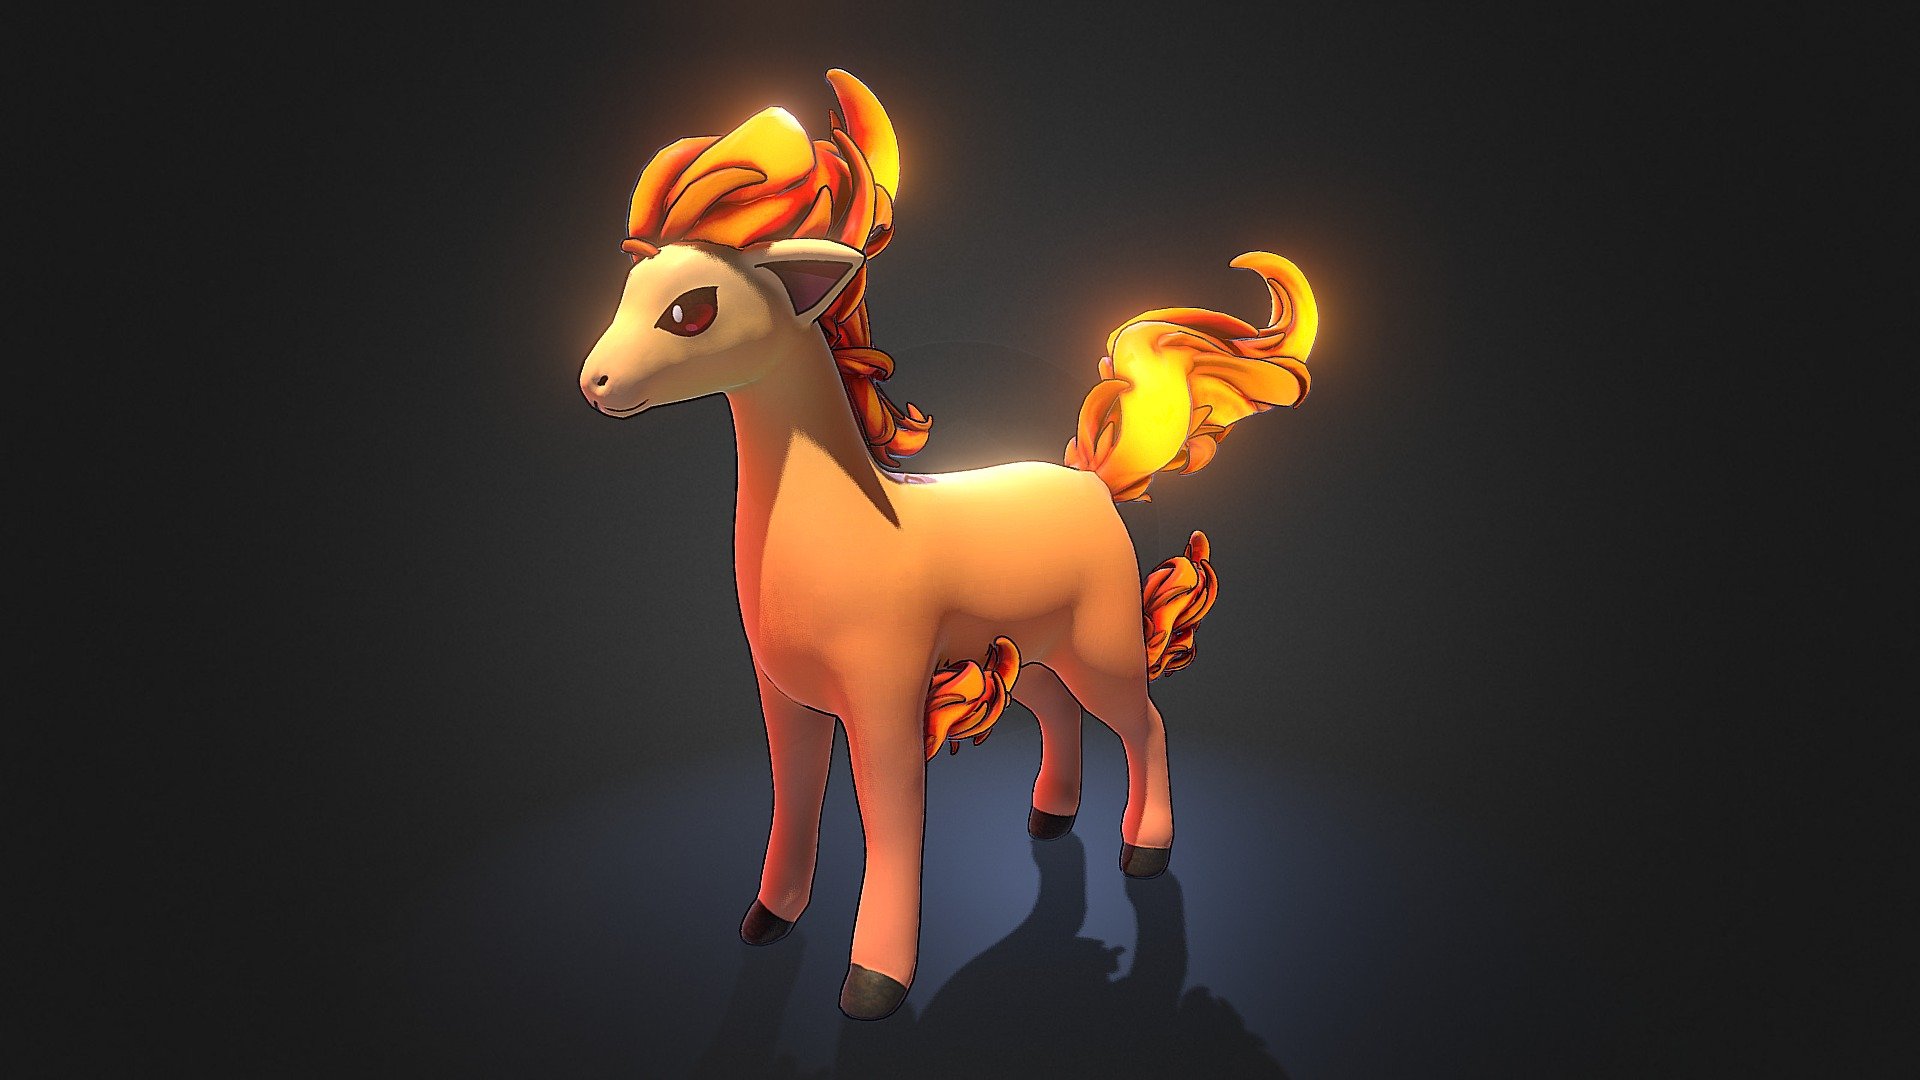 My chance  to play with fire - Ponyta pokemon - 3D model by 3dlogicus 3d model